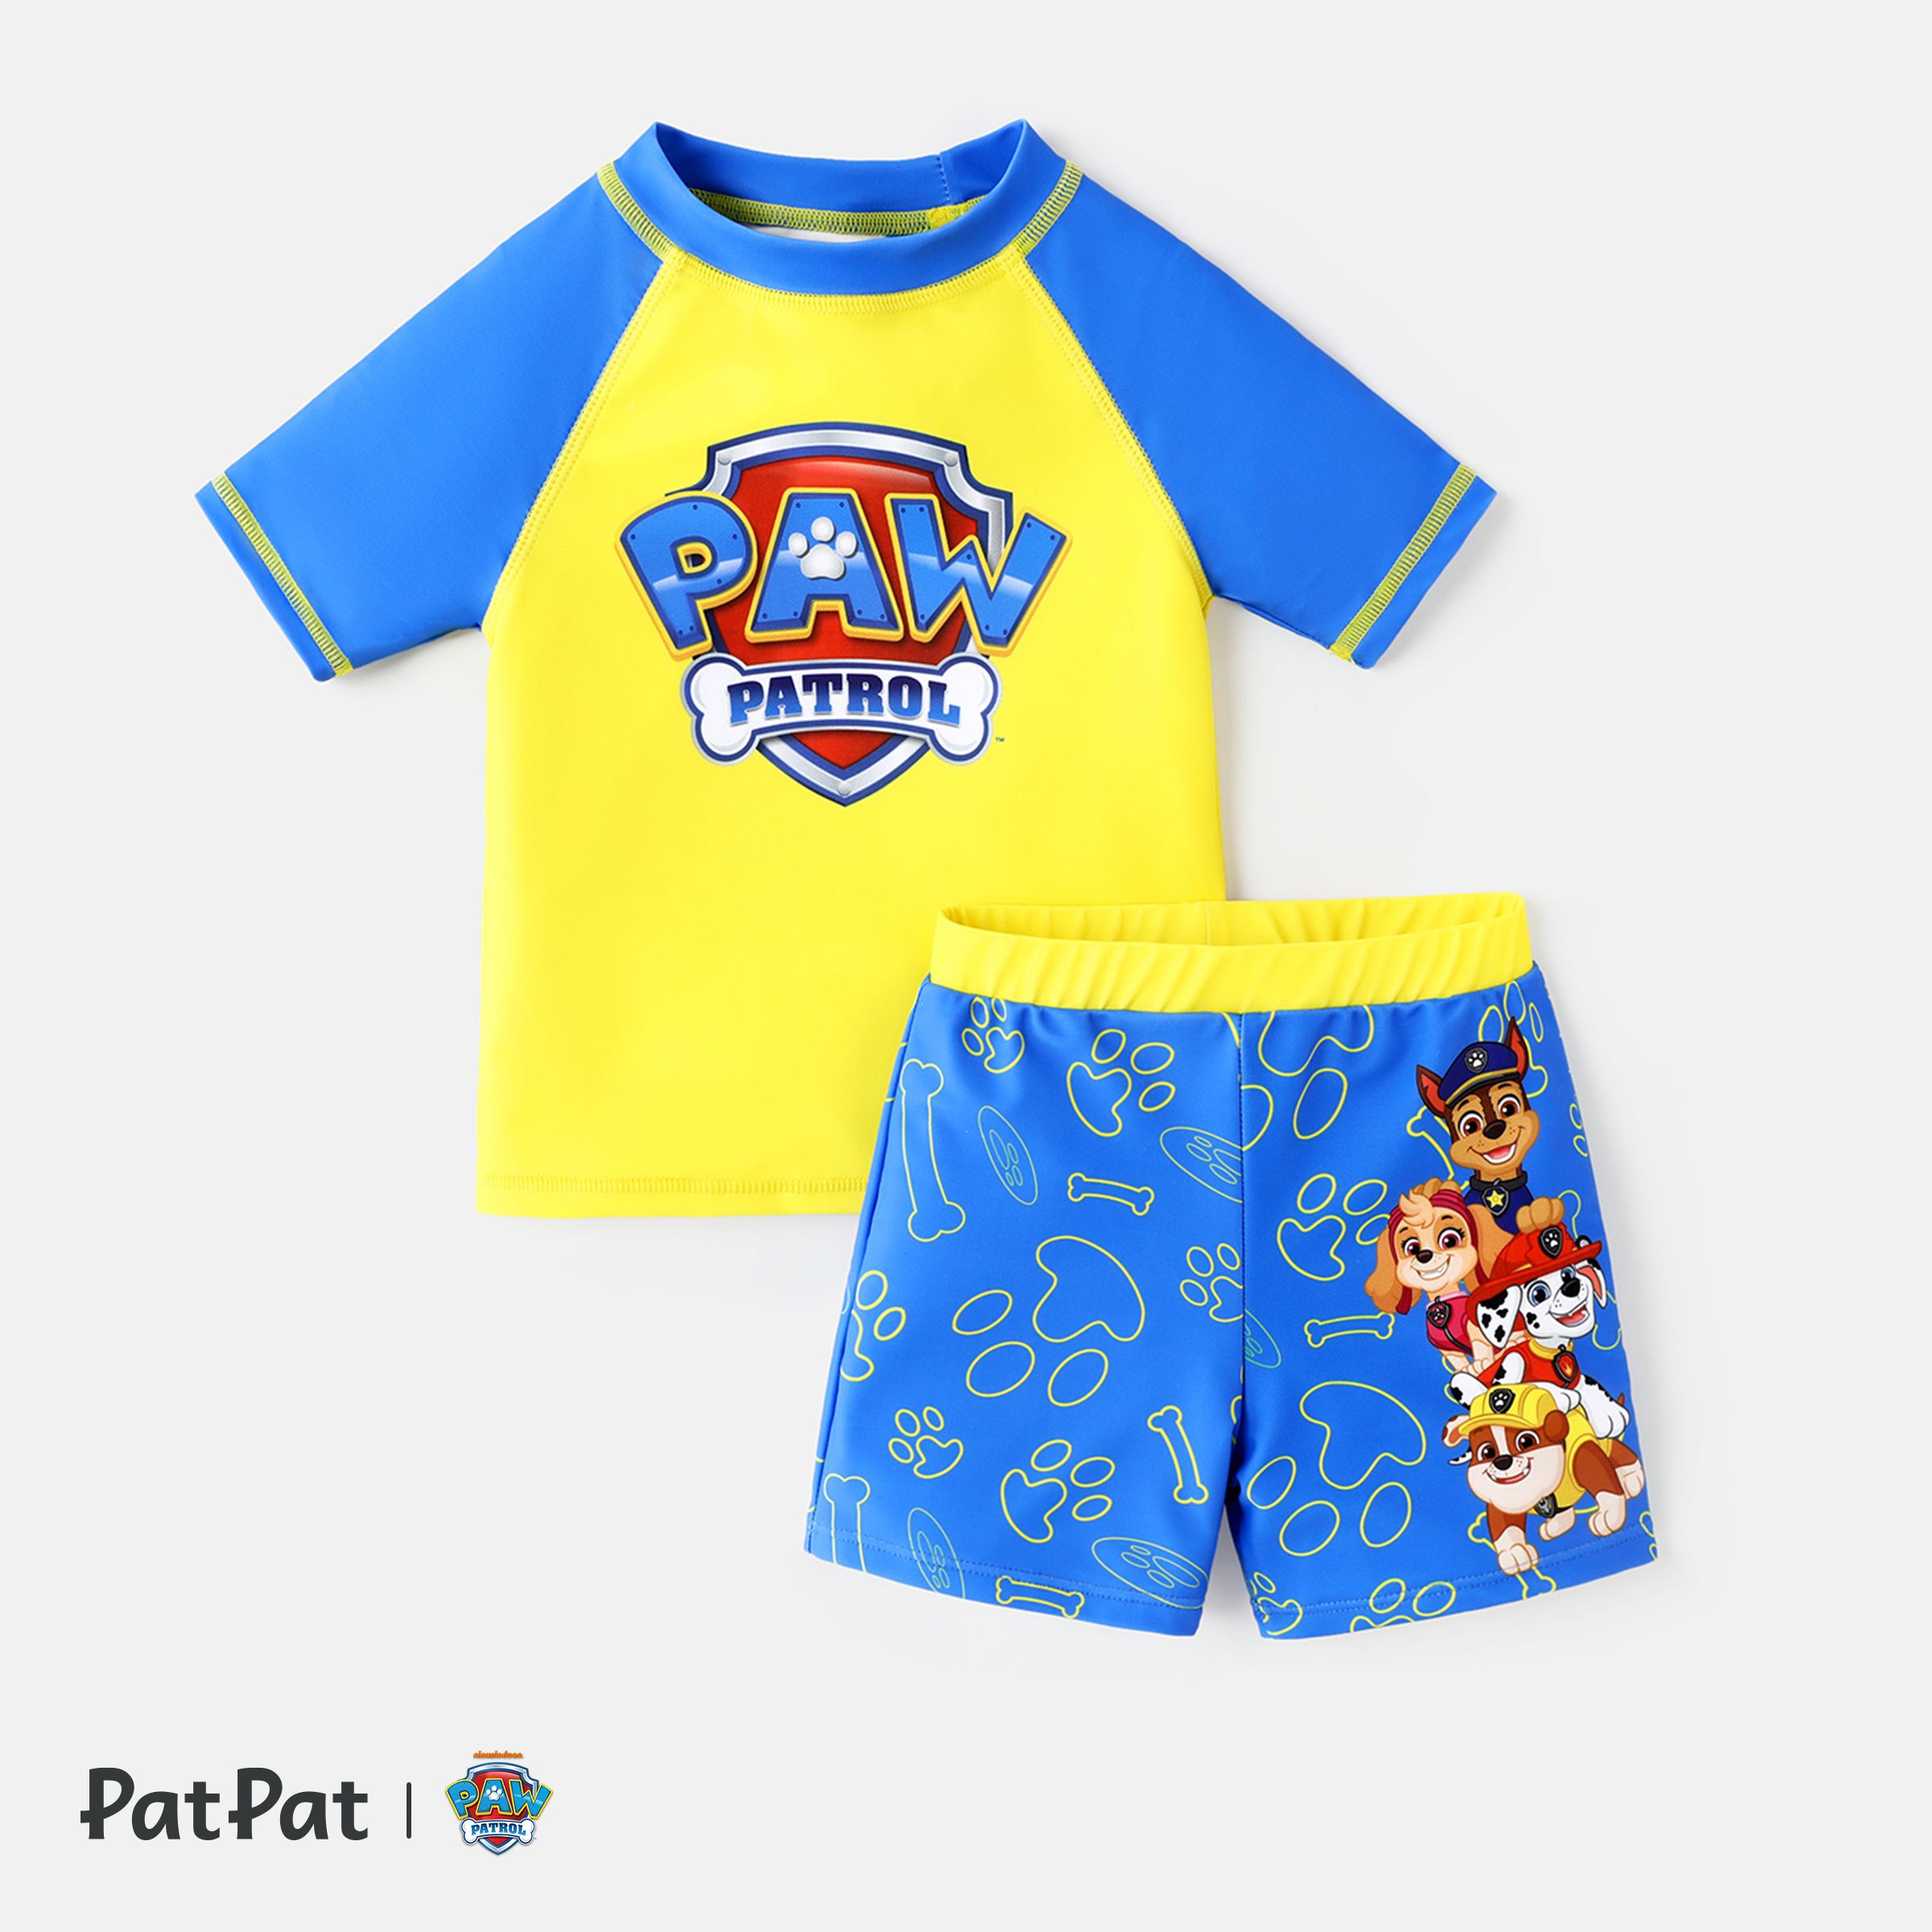 PAW Patrol Toddler Boy 2pcs Colorblock Tops And Trunks Swimsuit